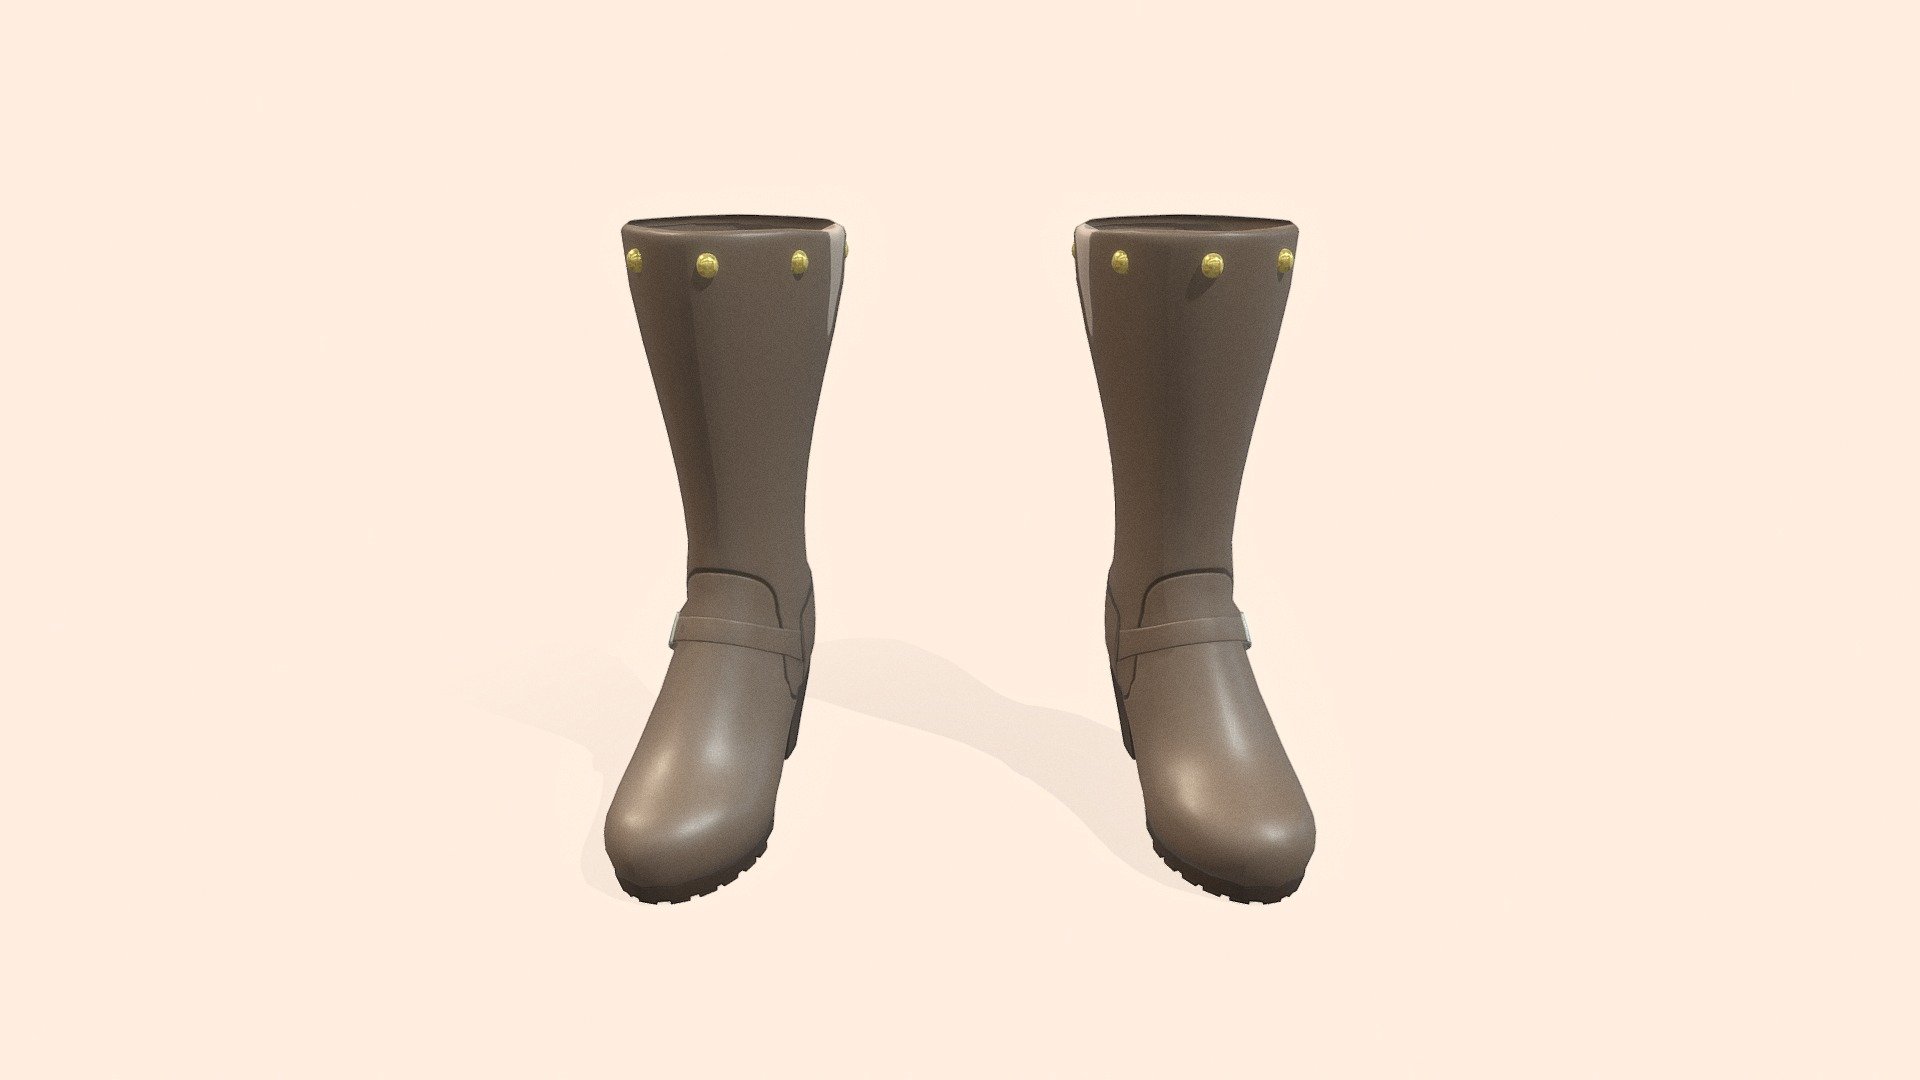 Boots - 3D model by JoanT [51247c1] - Sketchfab